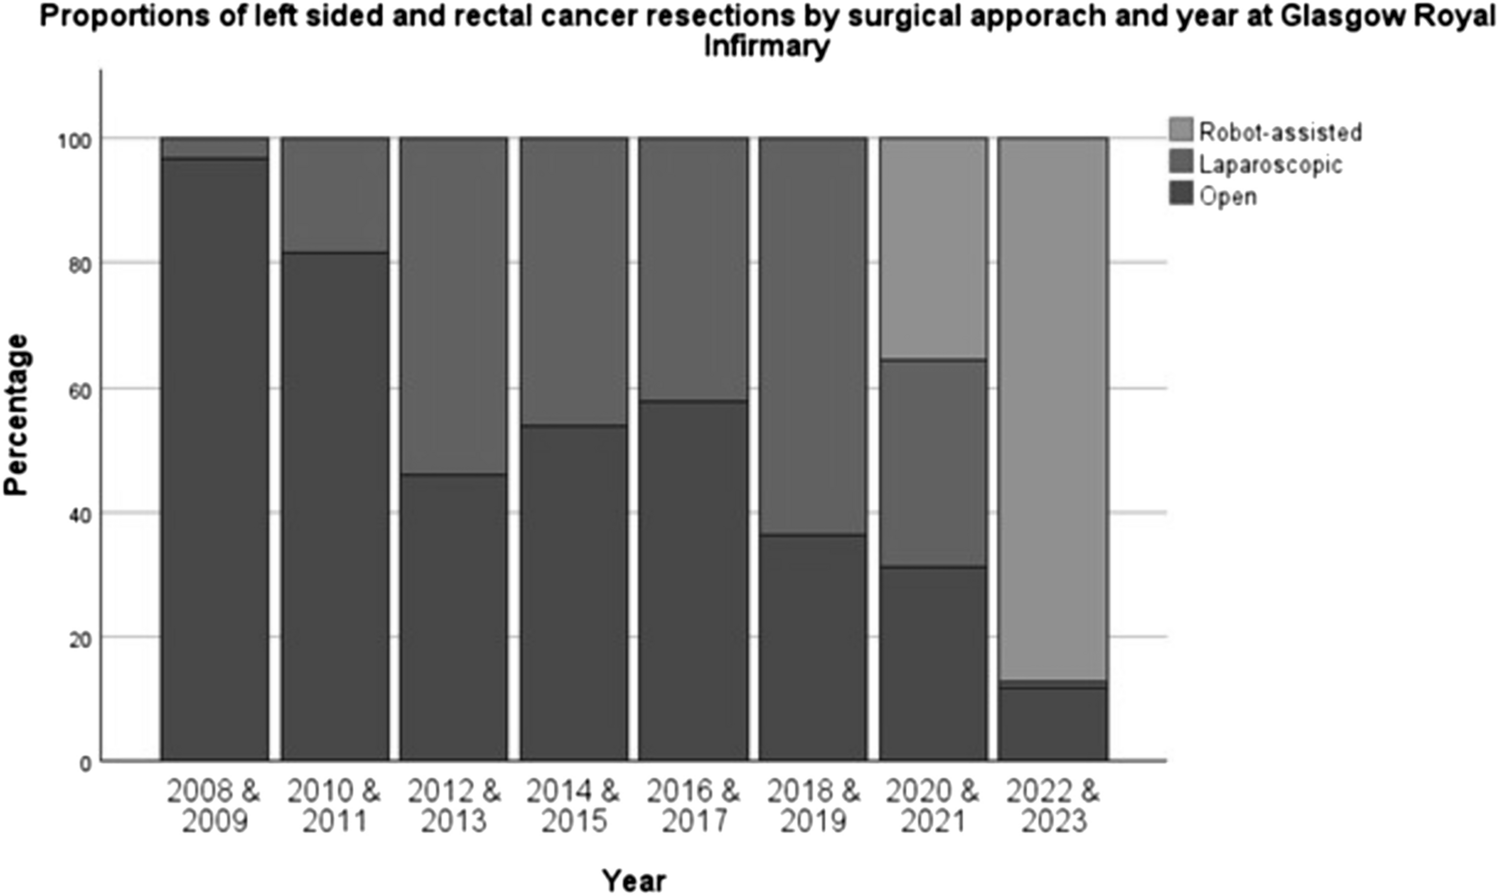 Robotic-assisted surgery for left-sided colon and rectal resections is associated with reduction in the postoperative surgical stress response and improved short-term outcomes: a cohort study